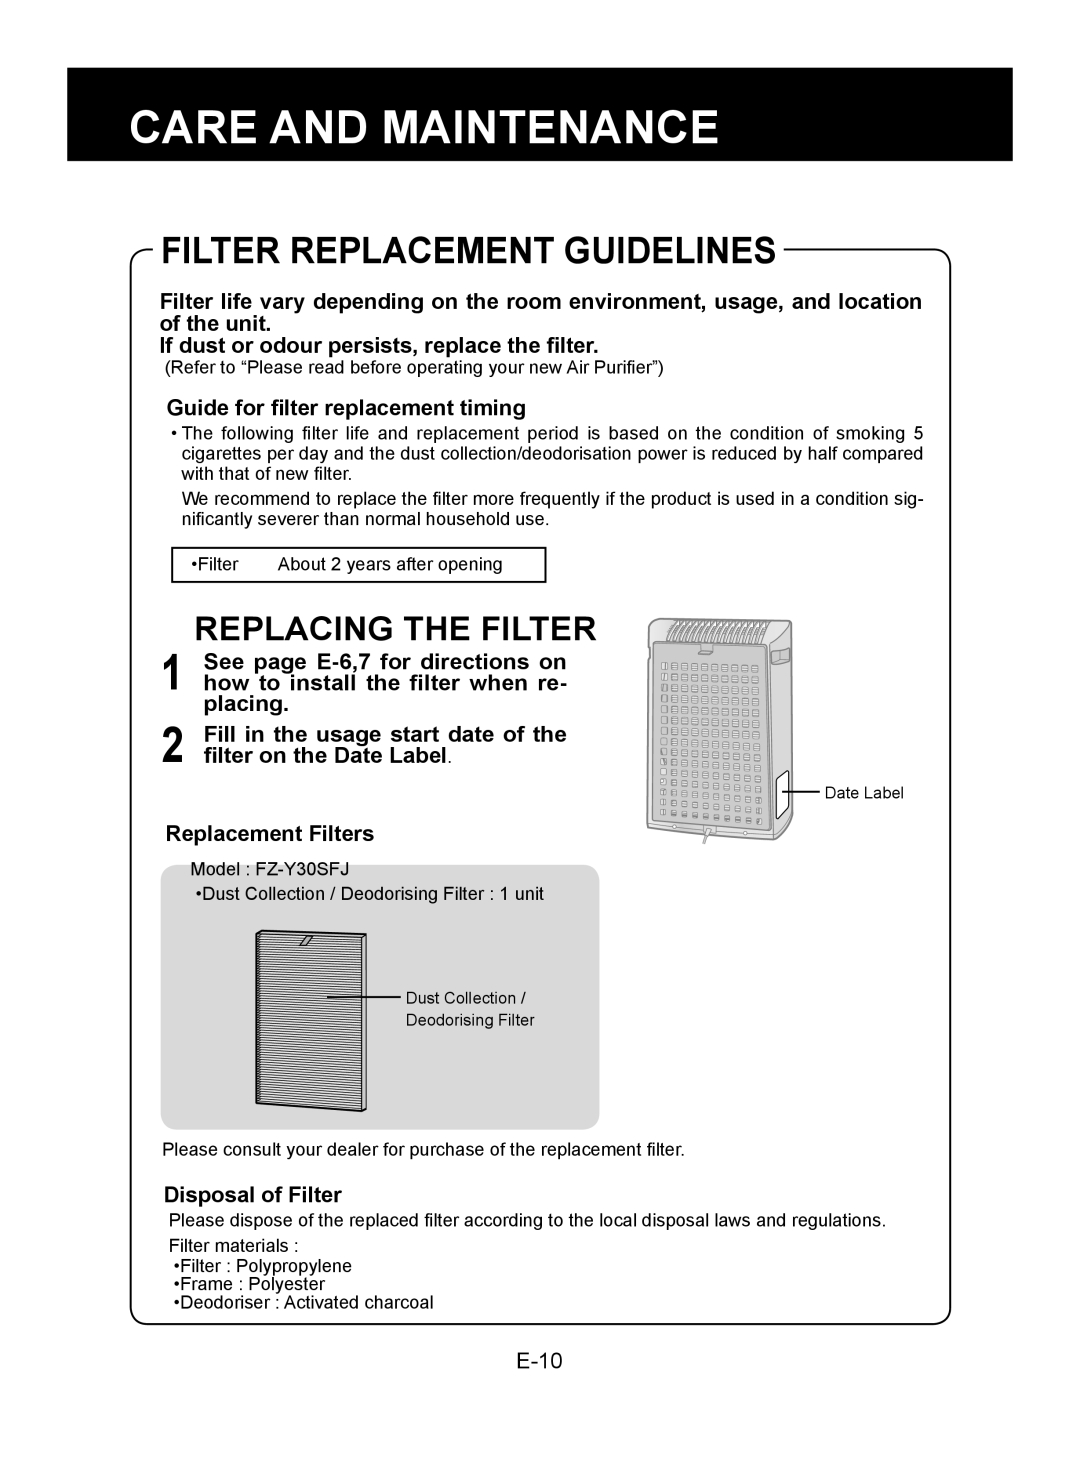 Sharp FU-Y30J-W Filter Replacement Guidelines, Replacing The Filter, If dust or odour persists, replace the filter, E-10 